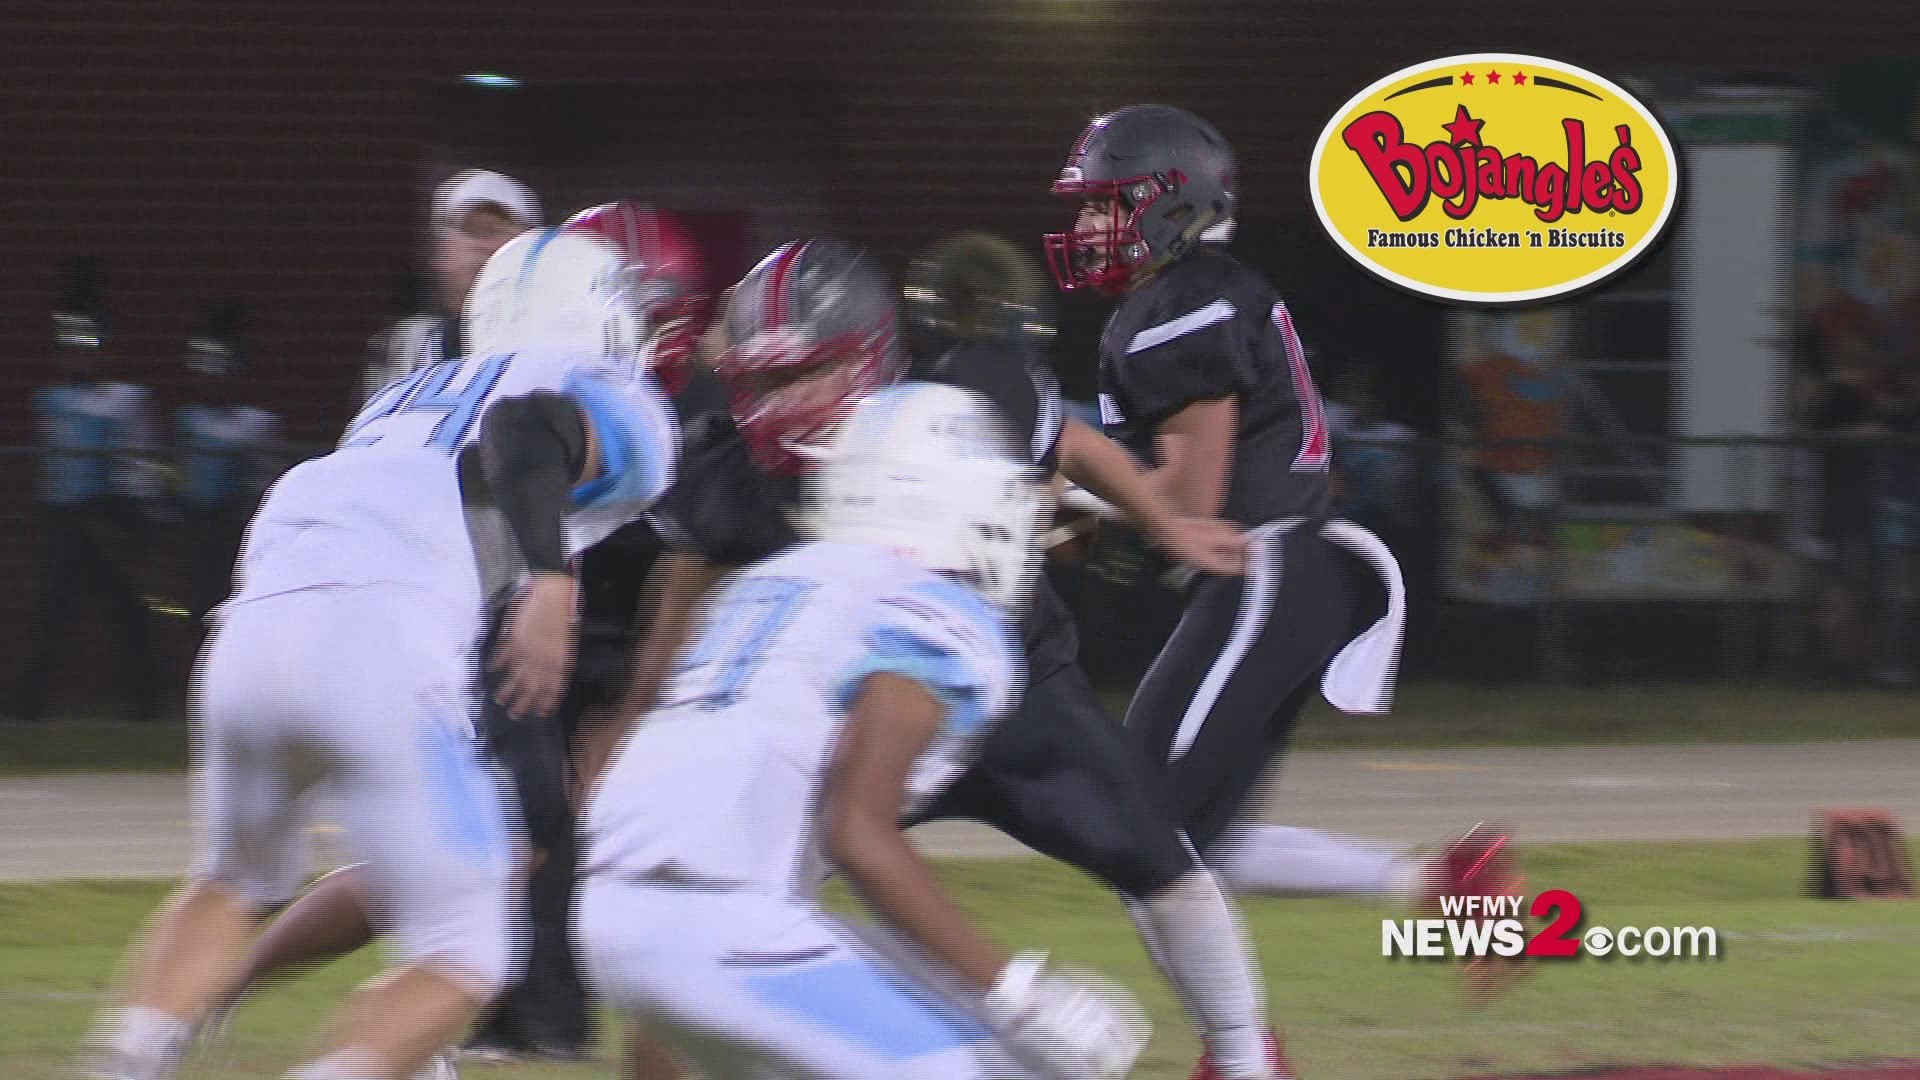 Highlights from the Wheatmore Warriors taking on the Trinity Bulldogs.